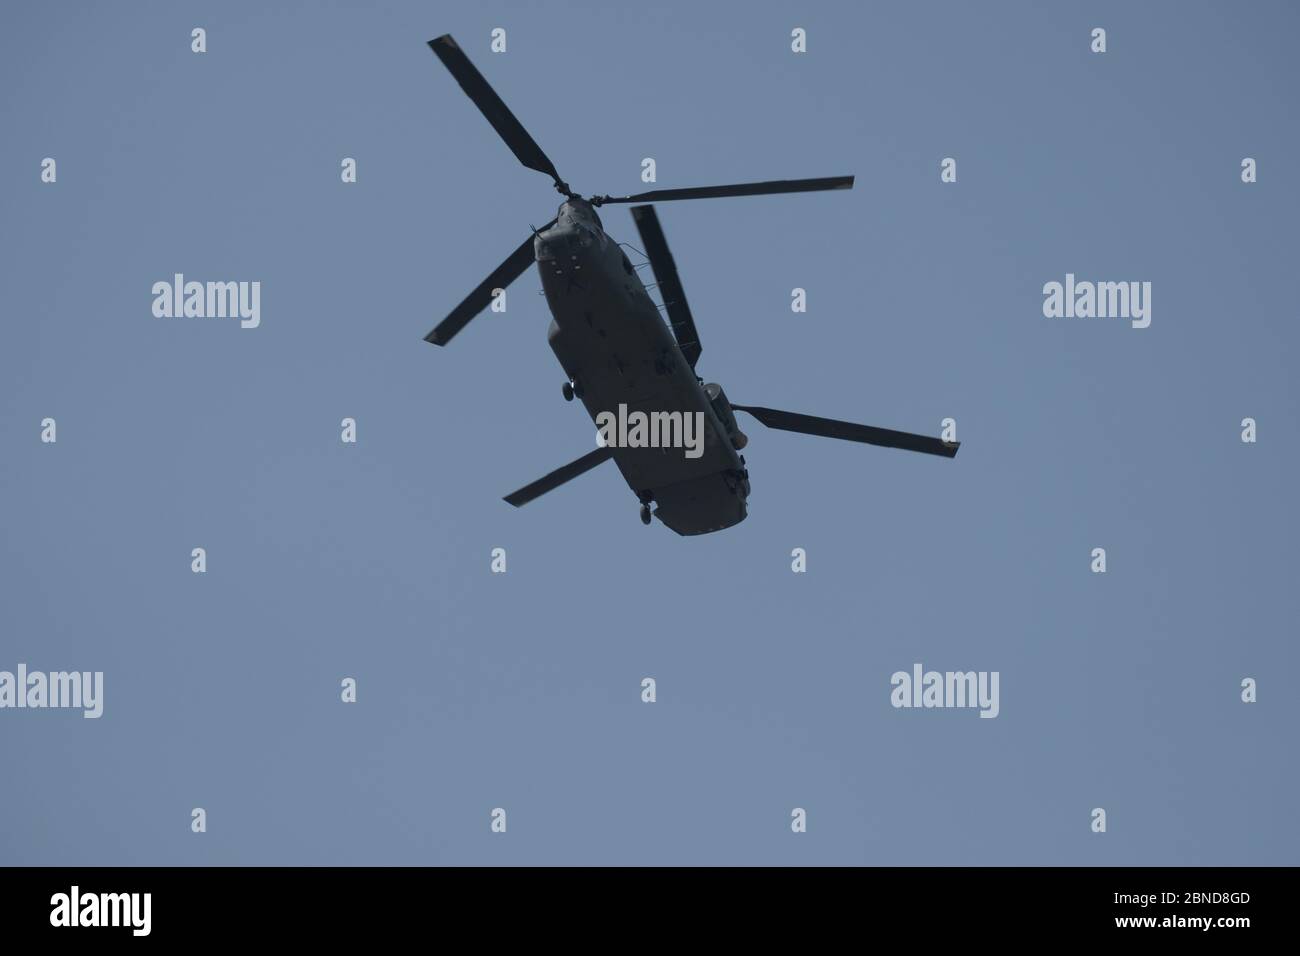 Low angle shot of American Helicopter Boeing CH-47 Chinook Stock Photo